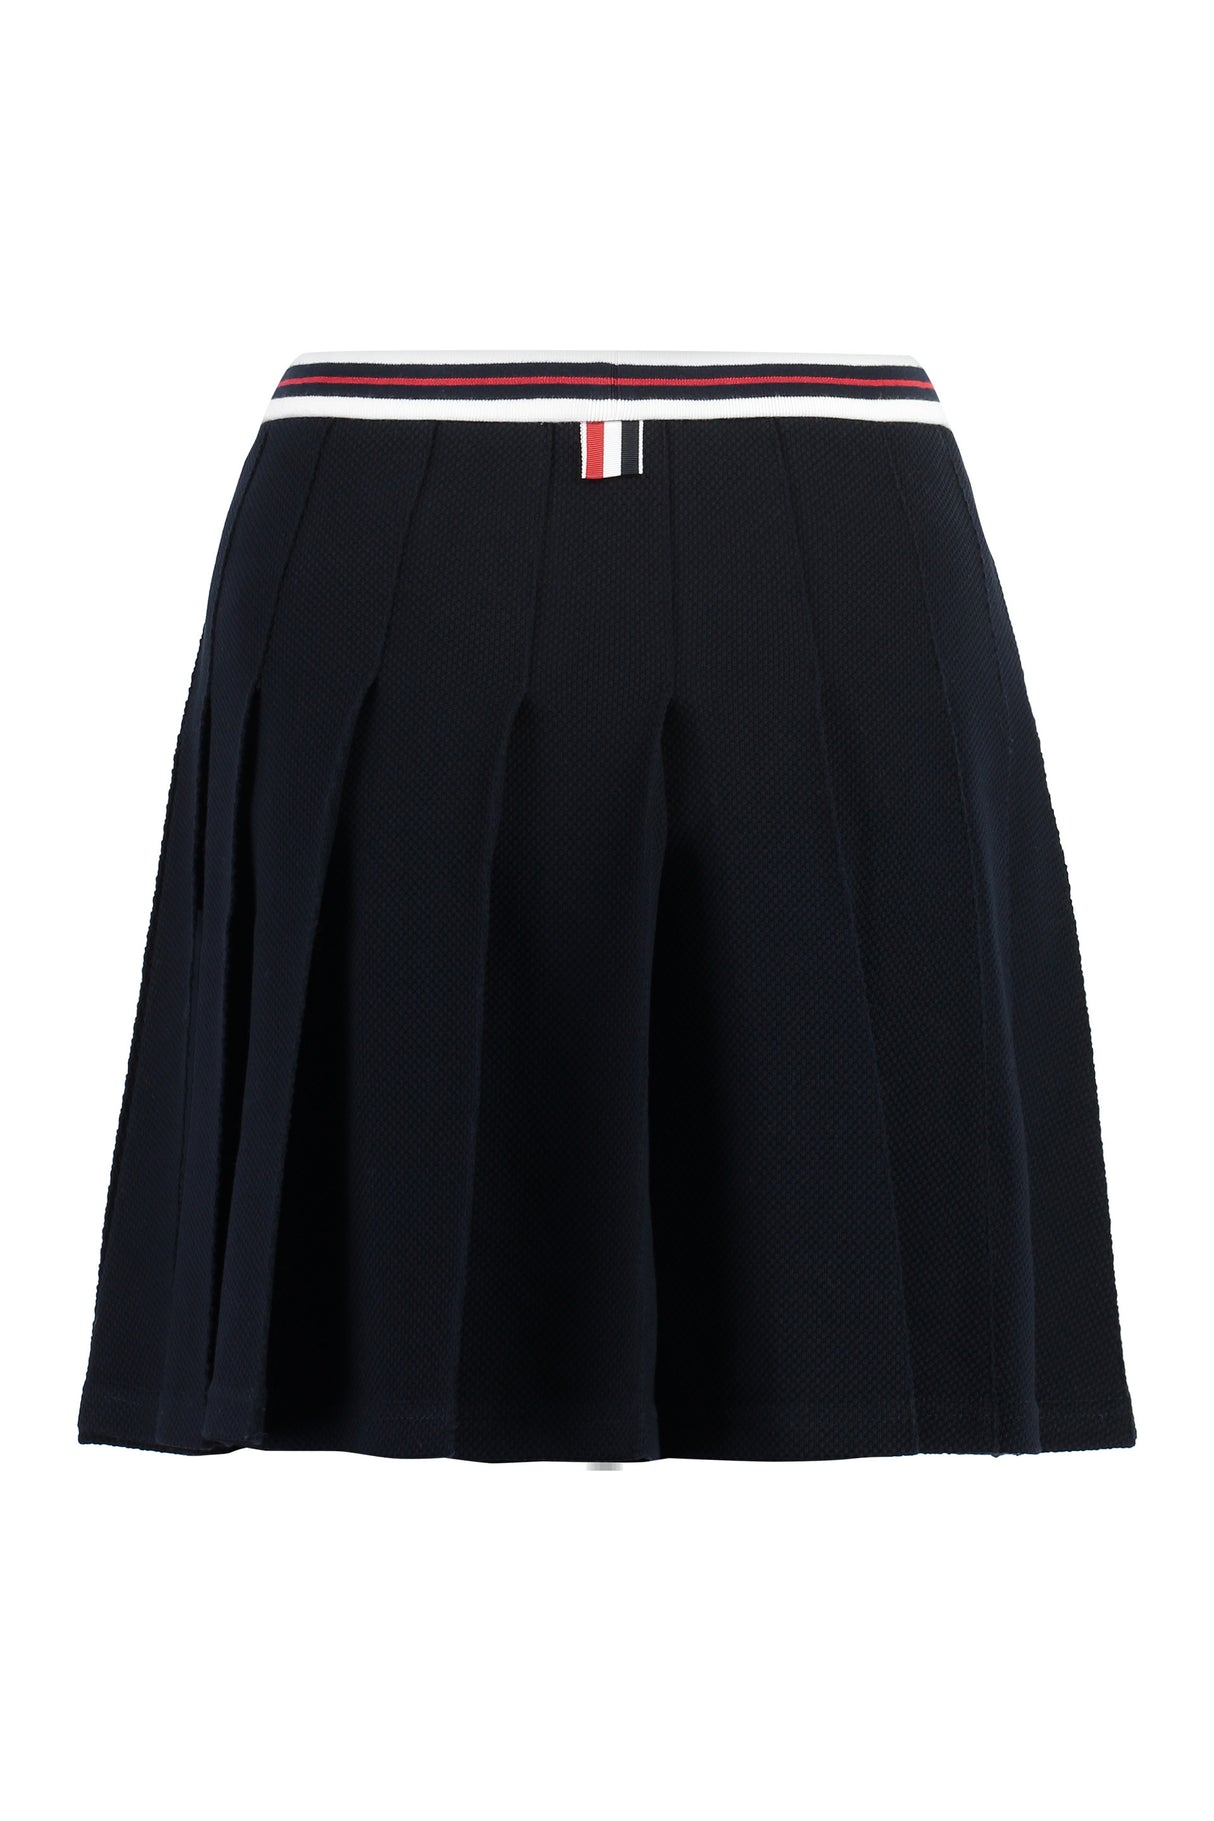 THOM BROWNE Pleated Skirt with Tricolor Detail for Women - FW23 Collection